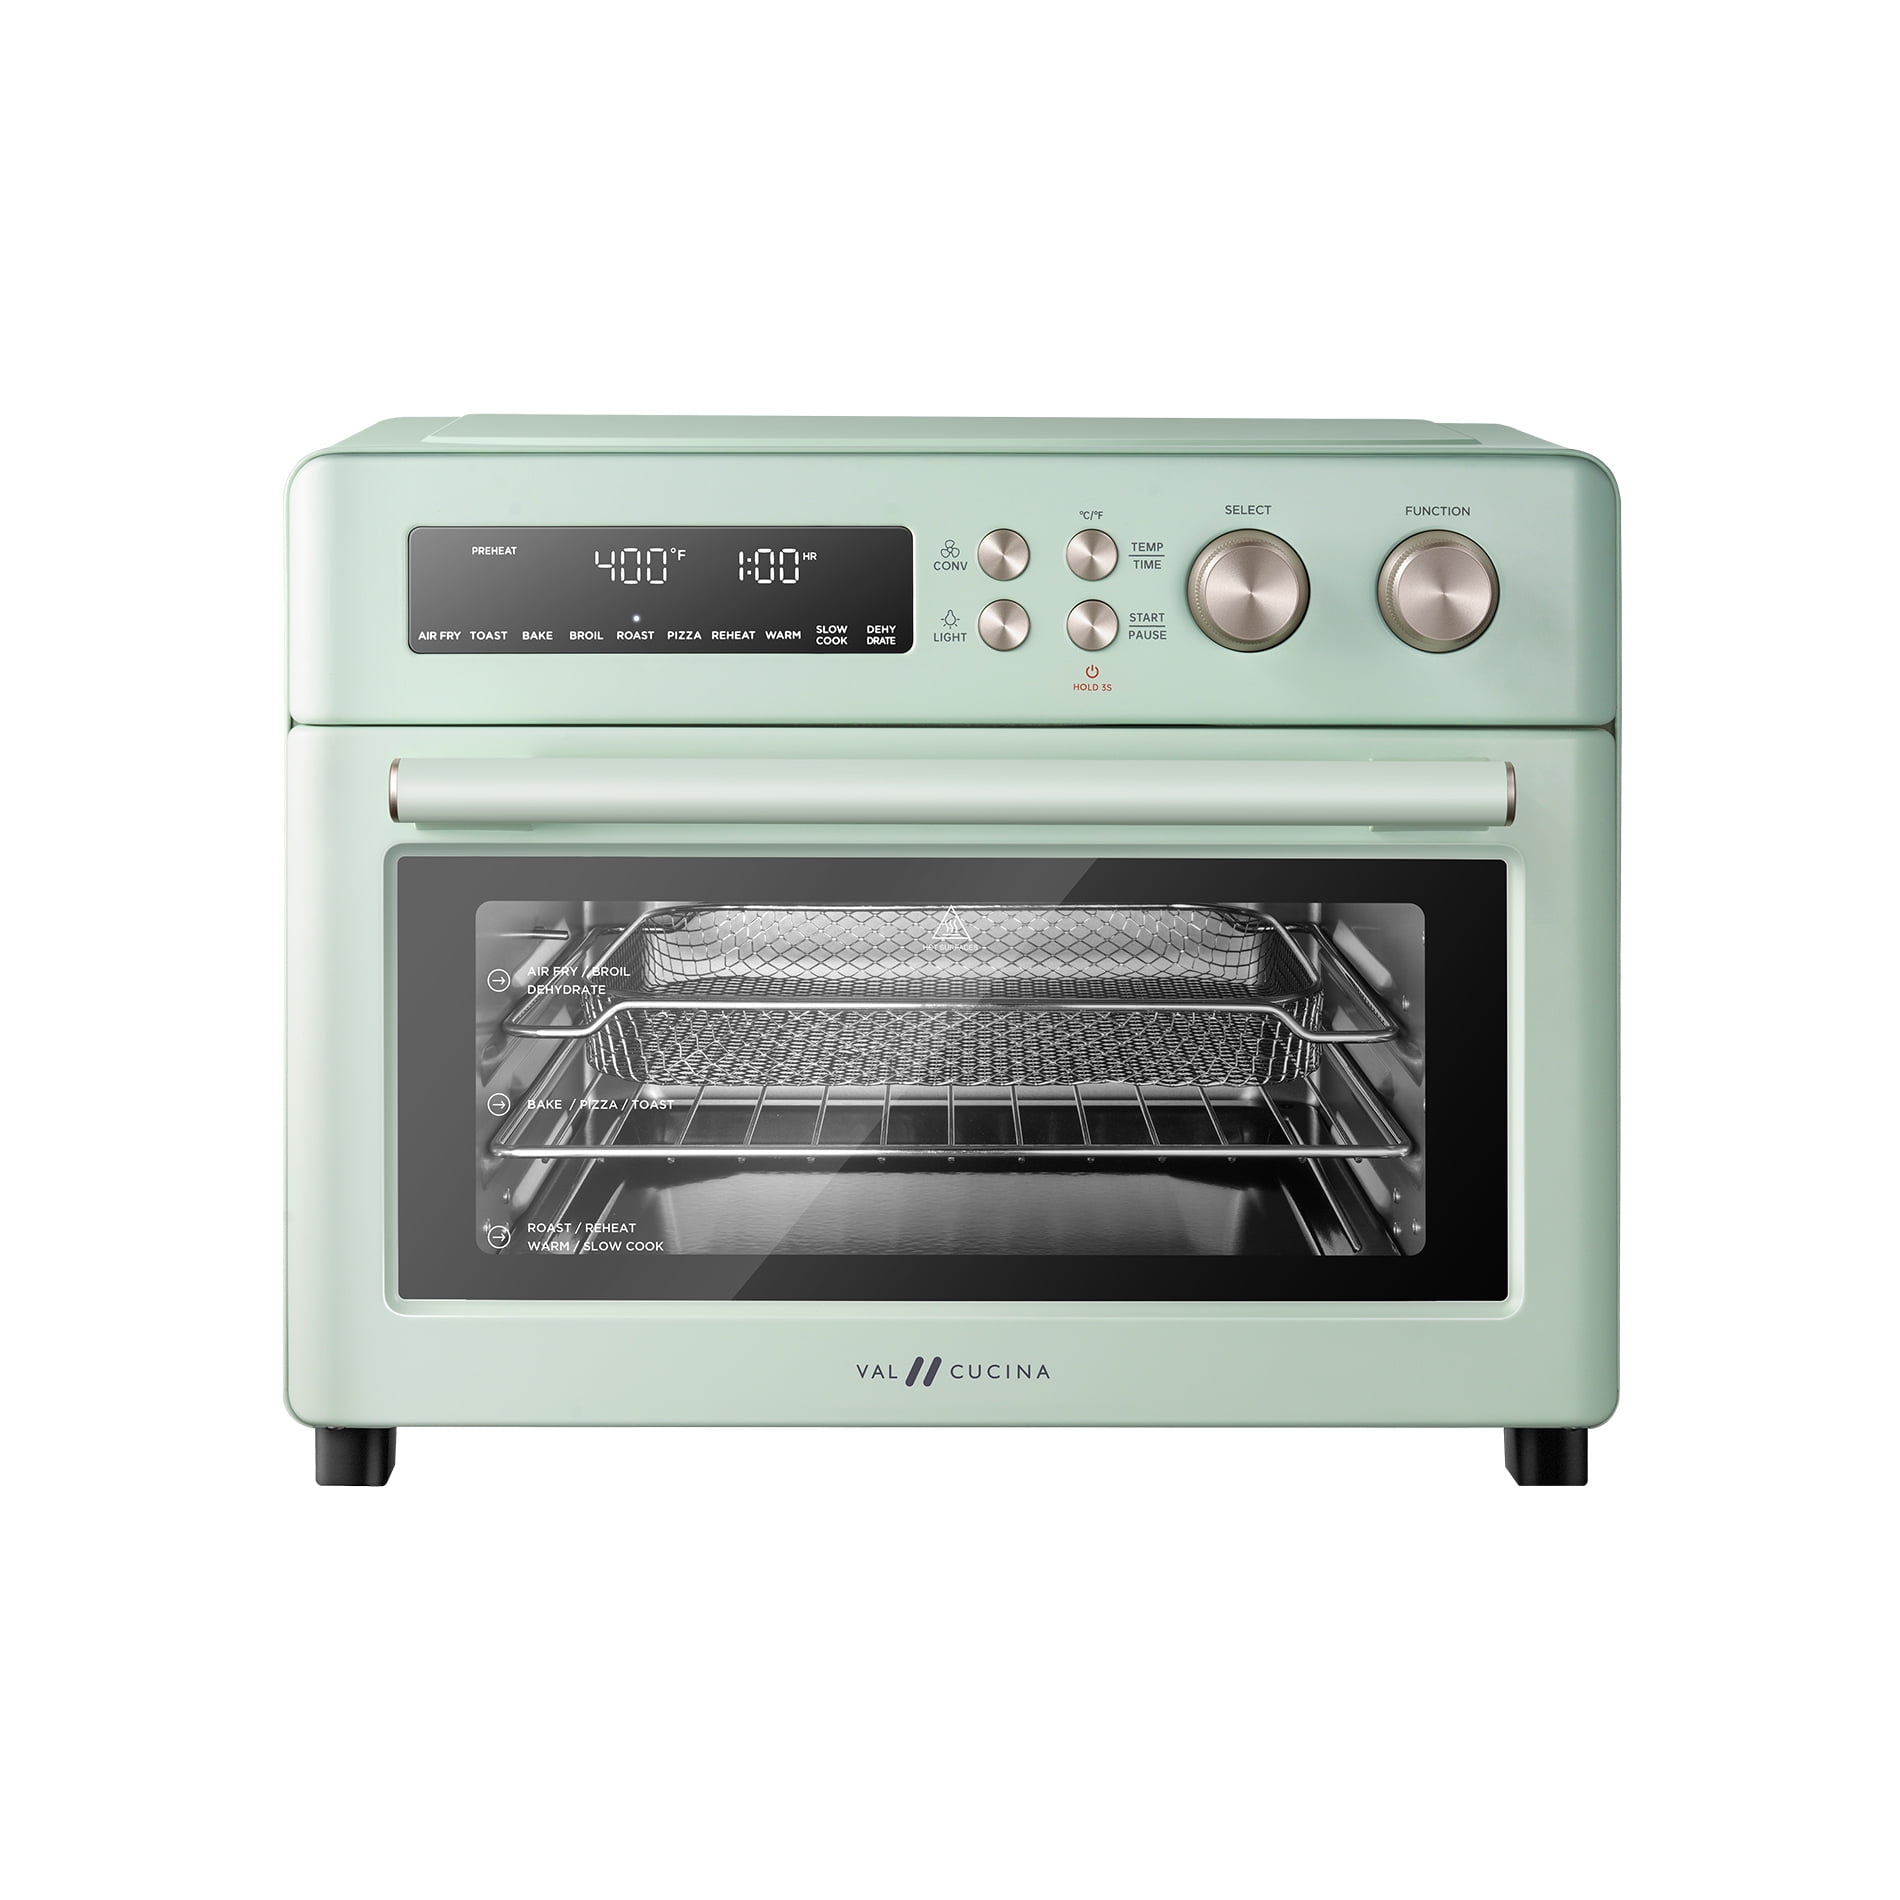 BLACK+DECKER TO3250XSB 8-Slice Extra Wide Convection Countertop Toaster  Oven, Includes Bake Pan, Broil Rack & Toasting Rack, Stainless Steel/Black  